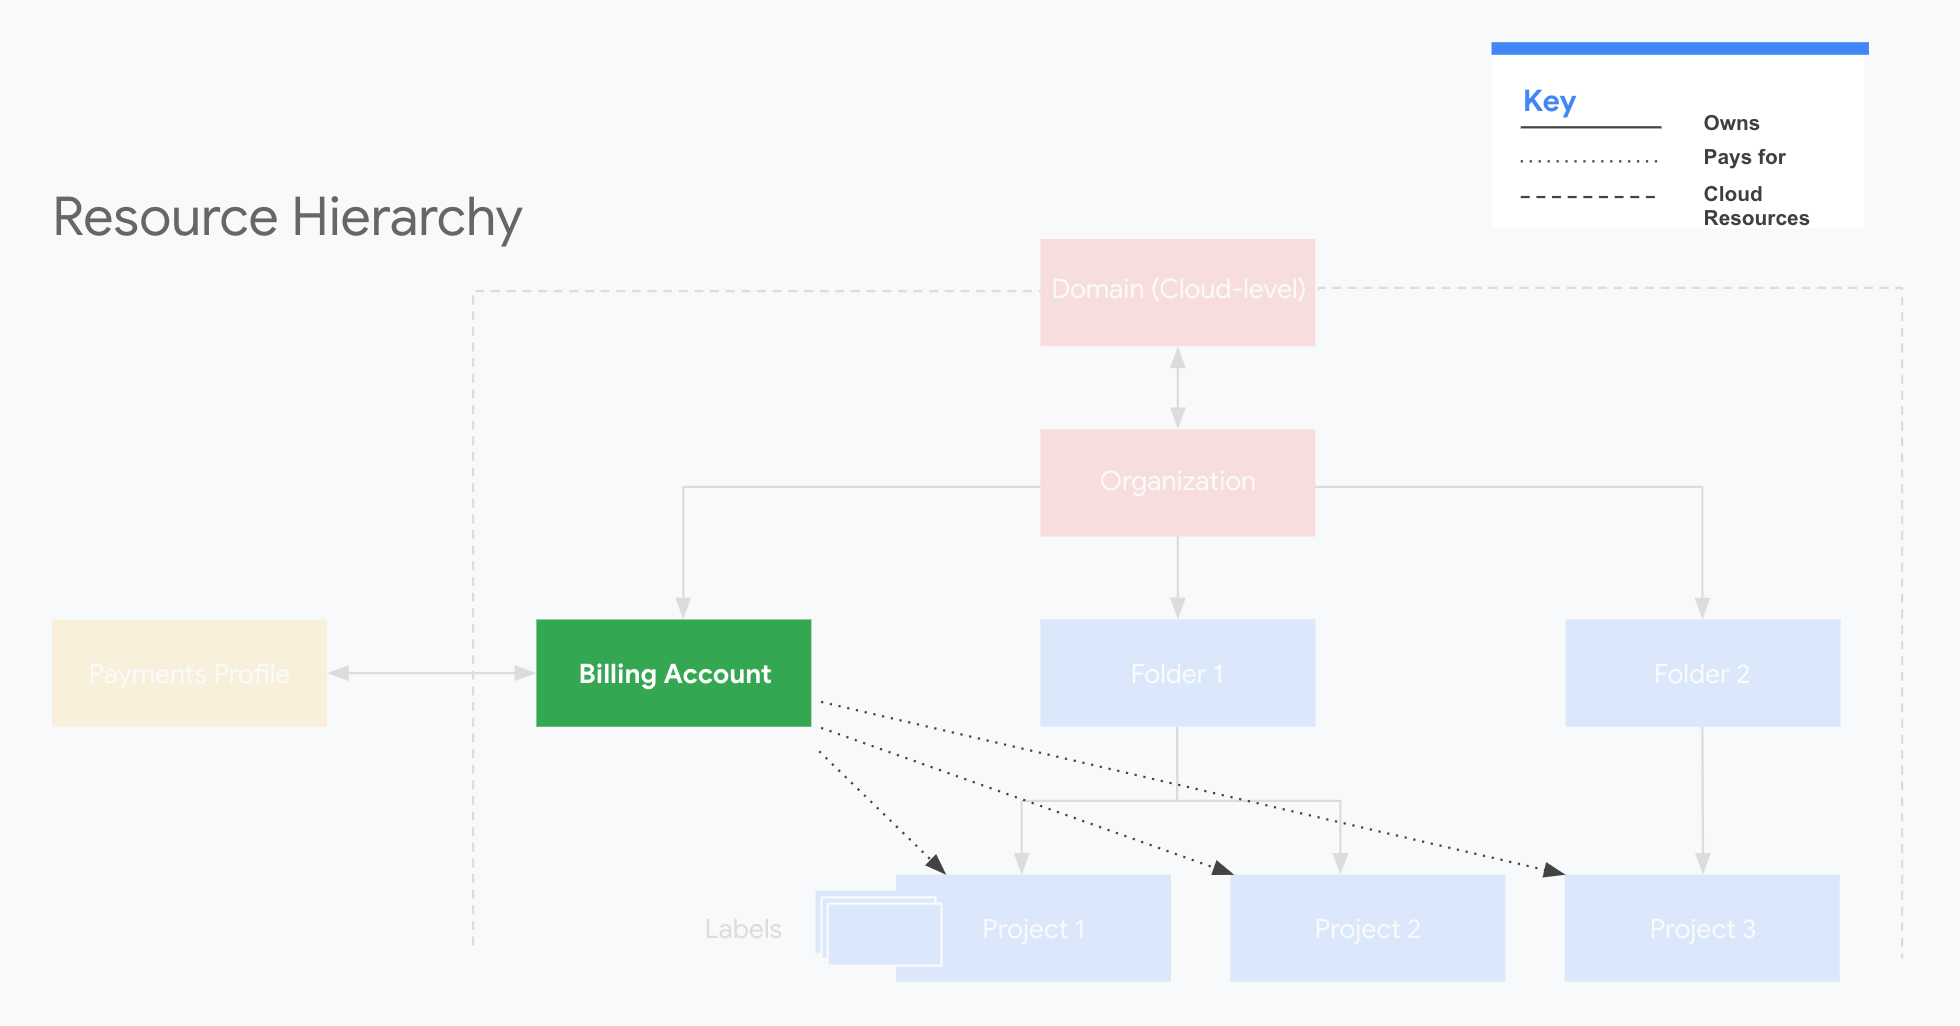 Cloud Billing Accounts in the Resource Hierarchy